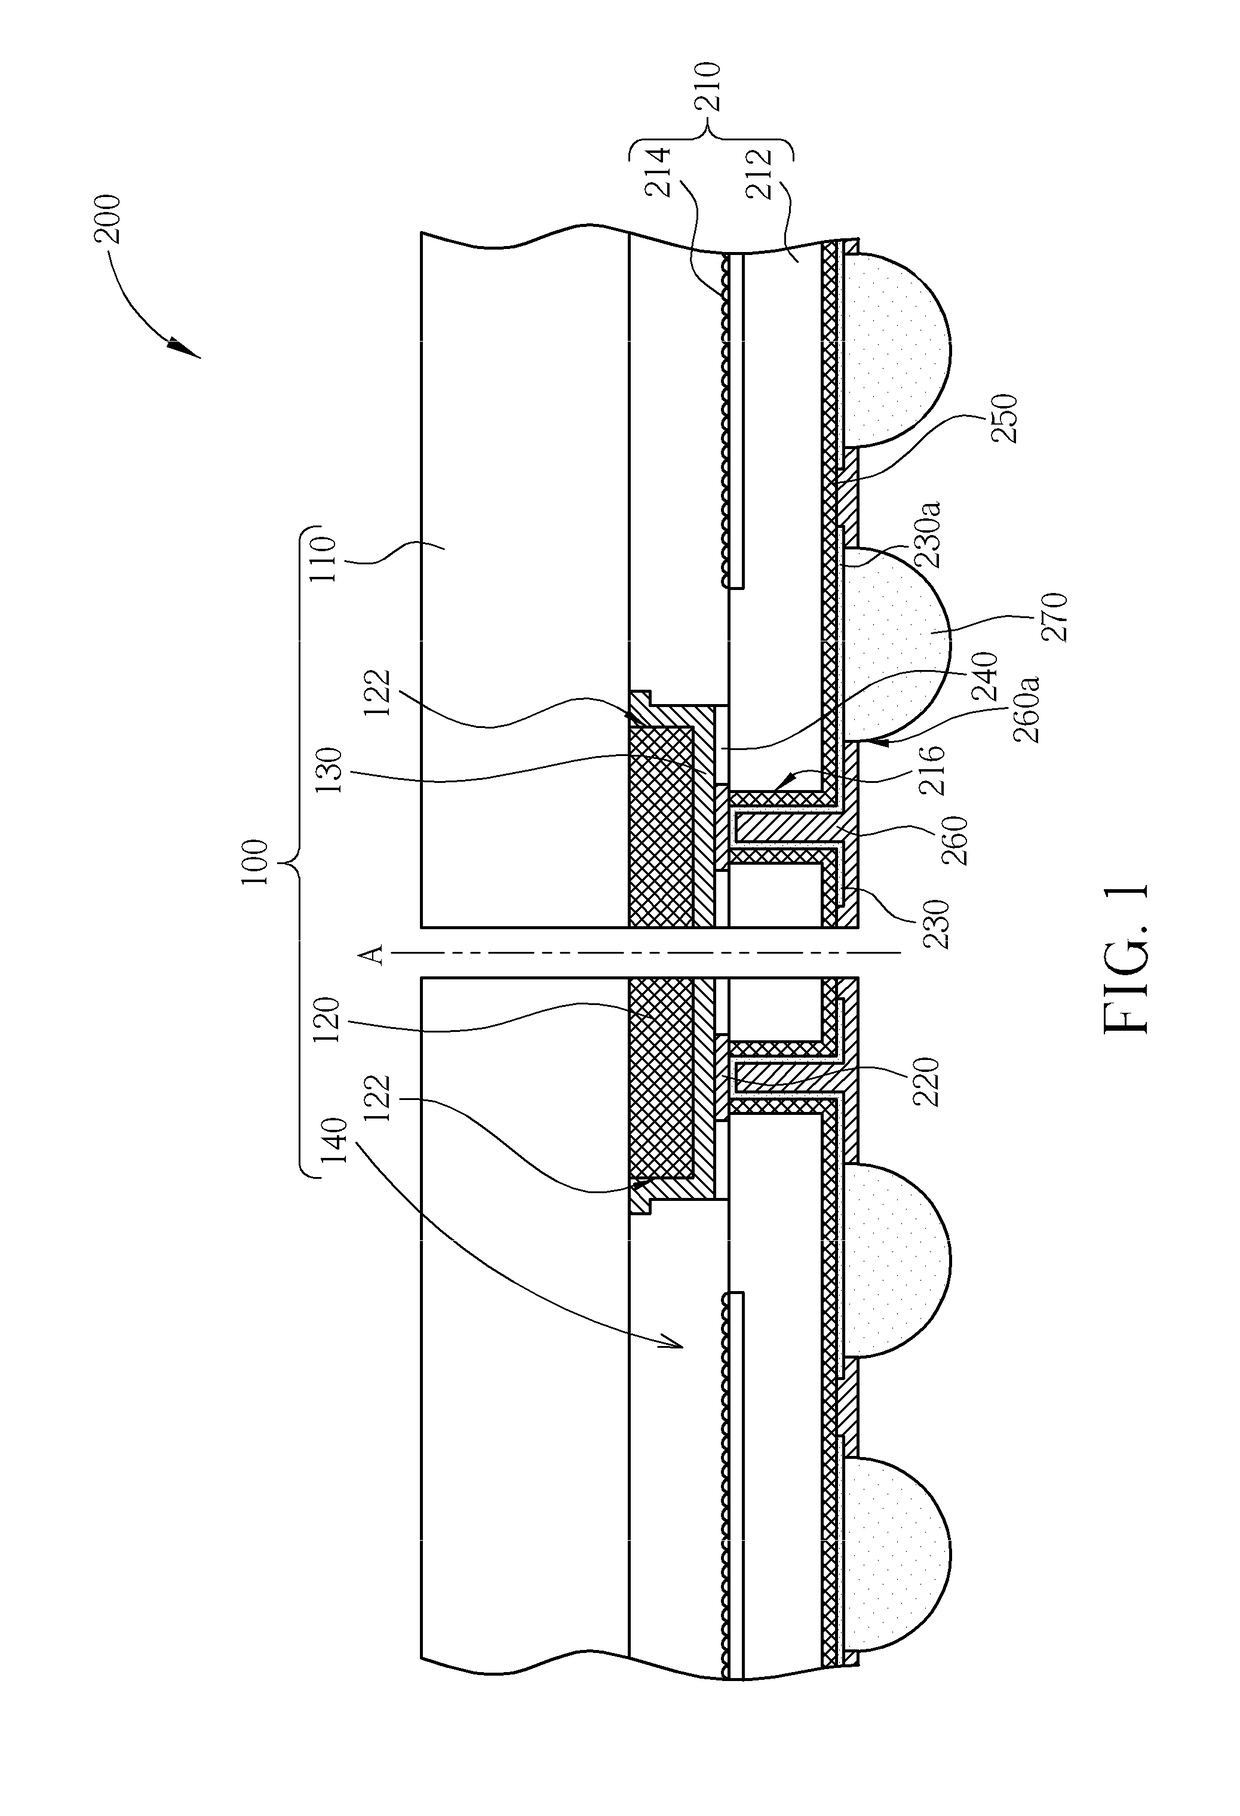 Optical cover plate with improved solder mask dam on glass for image sensor package and fabrication method thereof